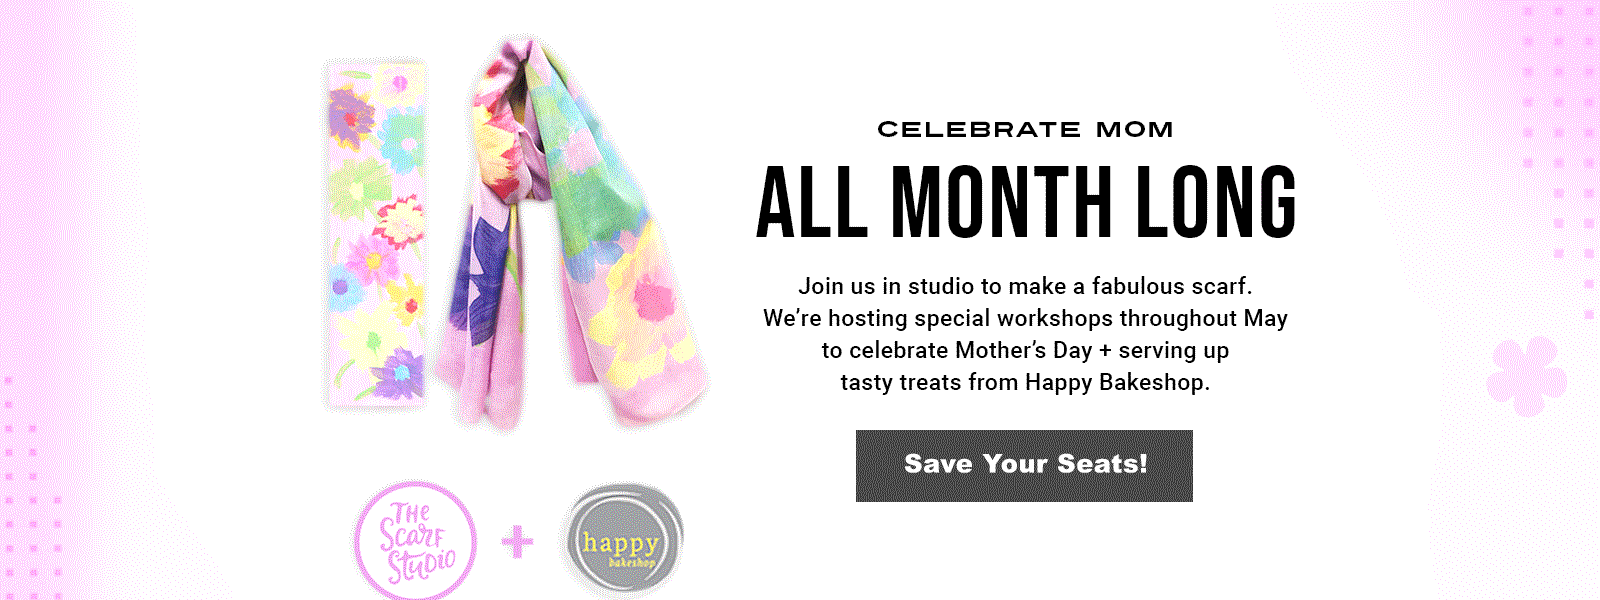 Join us in studio throughout the month of May to Celebrate Mom. We'll be hosting workshops and serving up tasty treats from Happy Bakeshop to help you celebrate and make a special scarf.